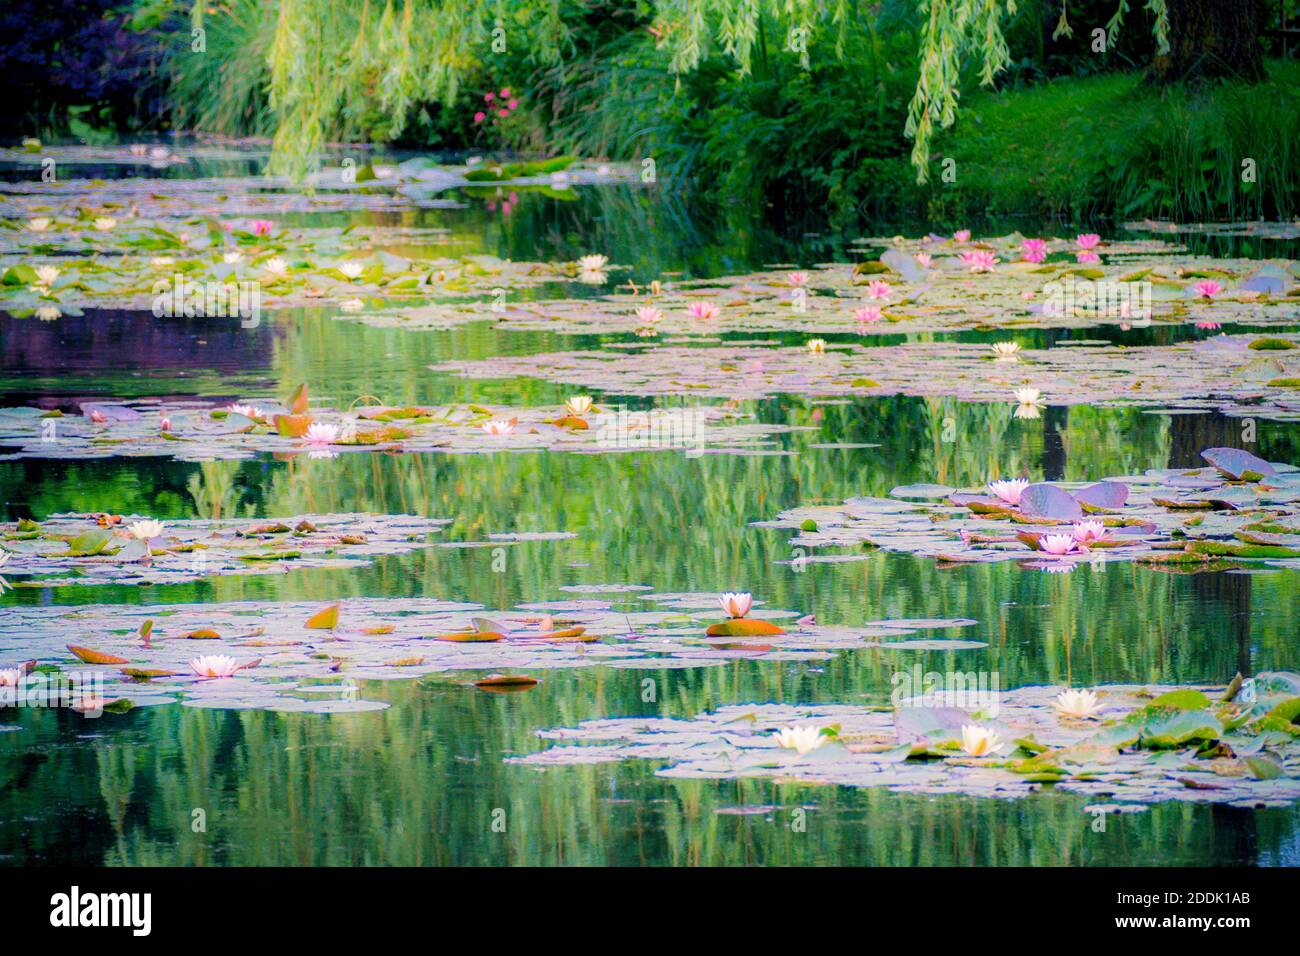 Les Jardins de Monet à Giverny - Monet's Garden - House and water lily  gardens of French artist Claude Monet in Giverny, France Stock Photo - Alamy